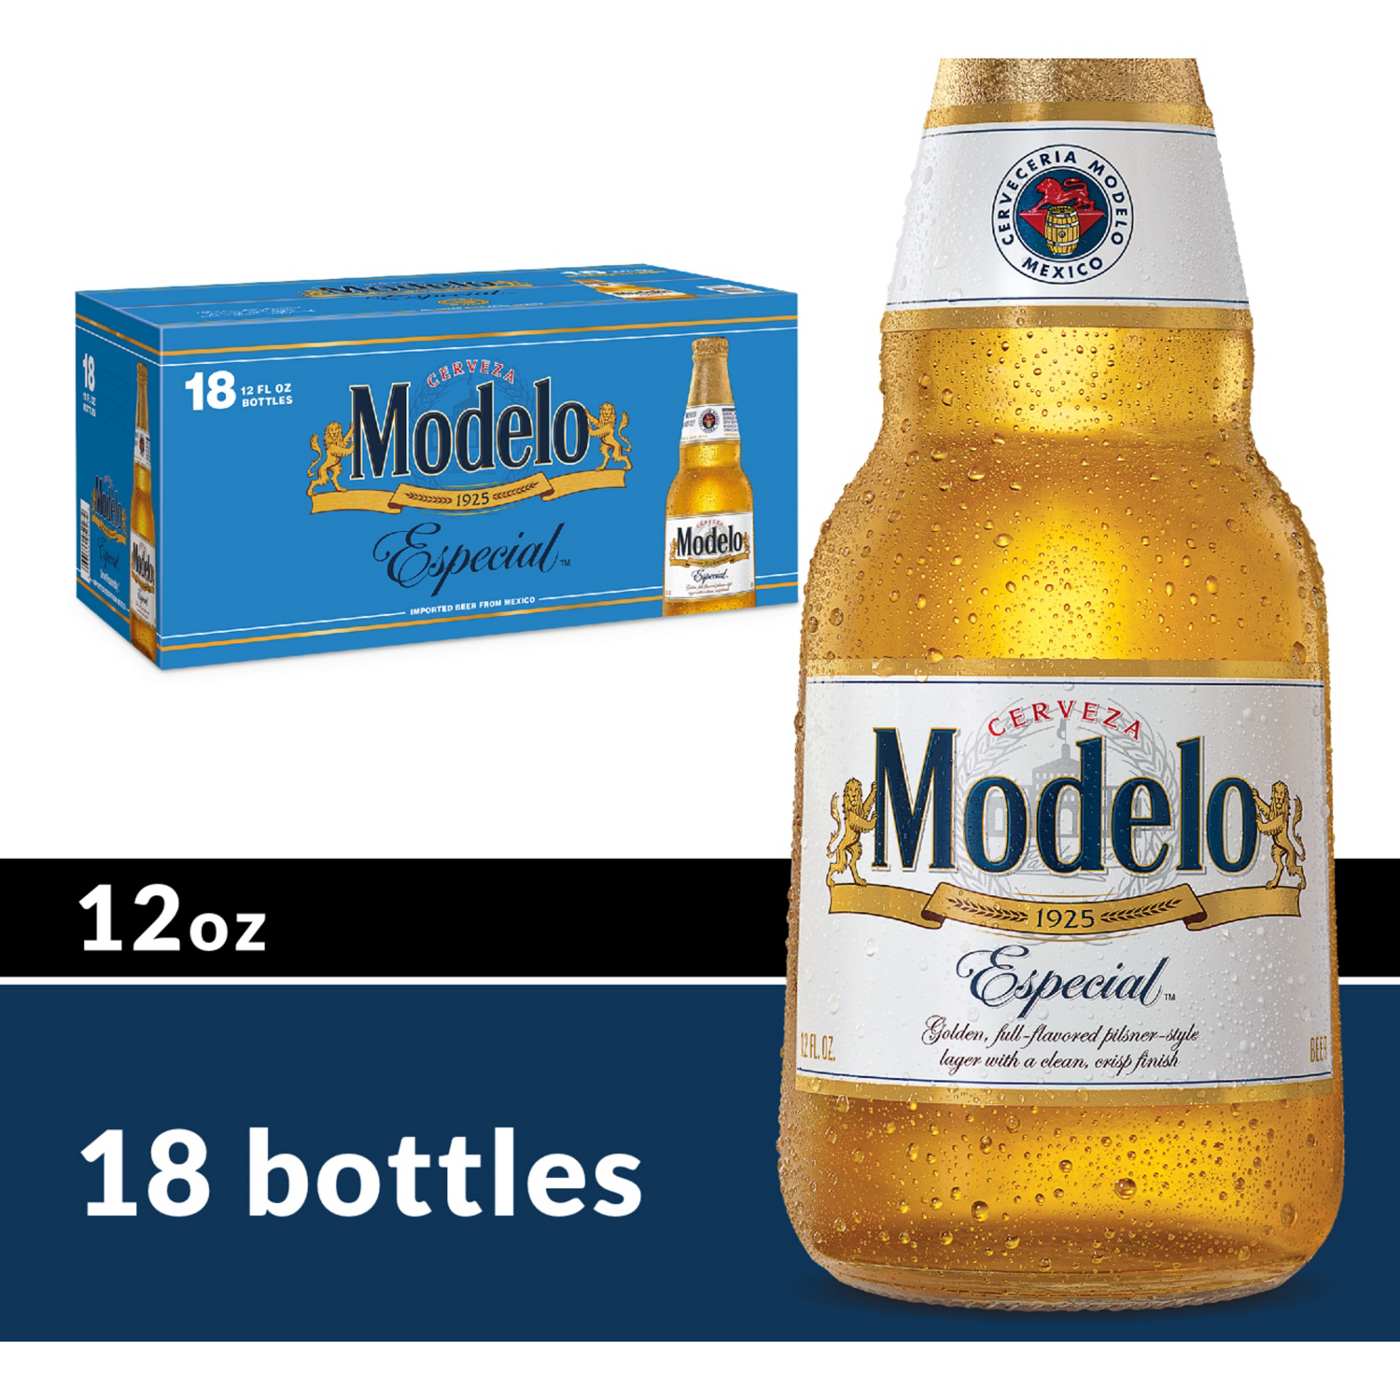 Modelo Especial Mexican Lager Import Beer 12 oz Bottles, 18 pk; image 6 of 11